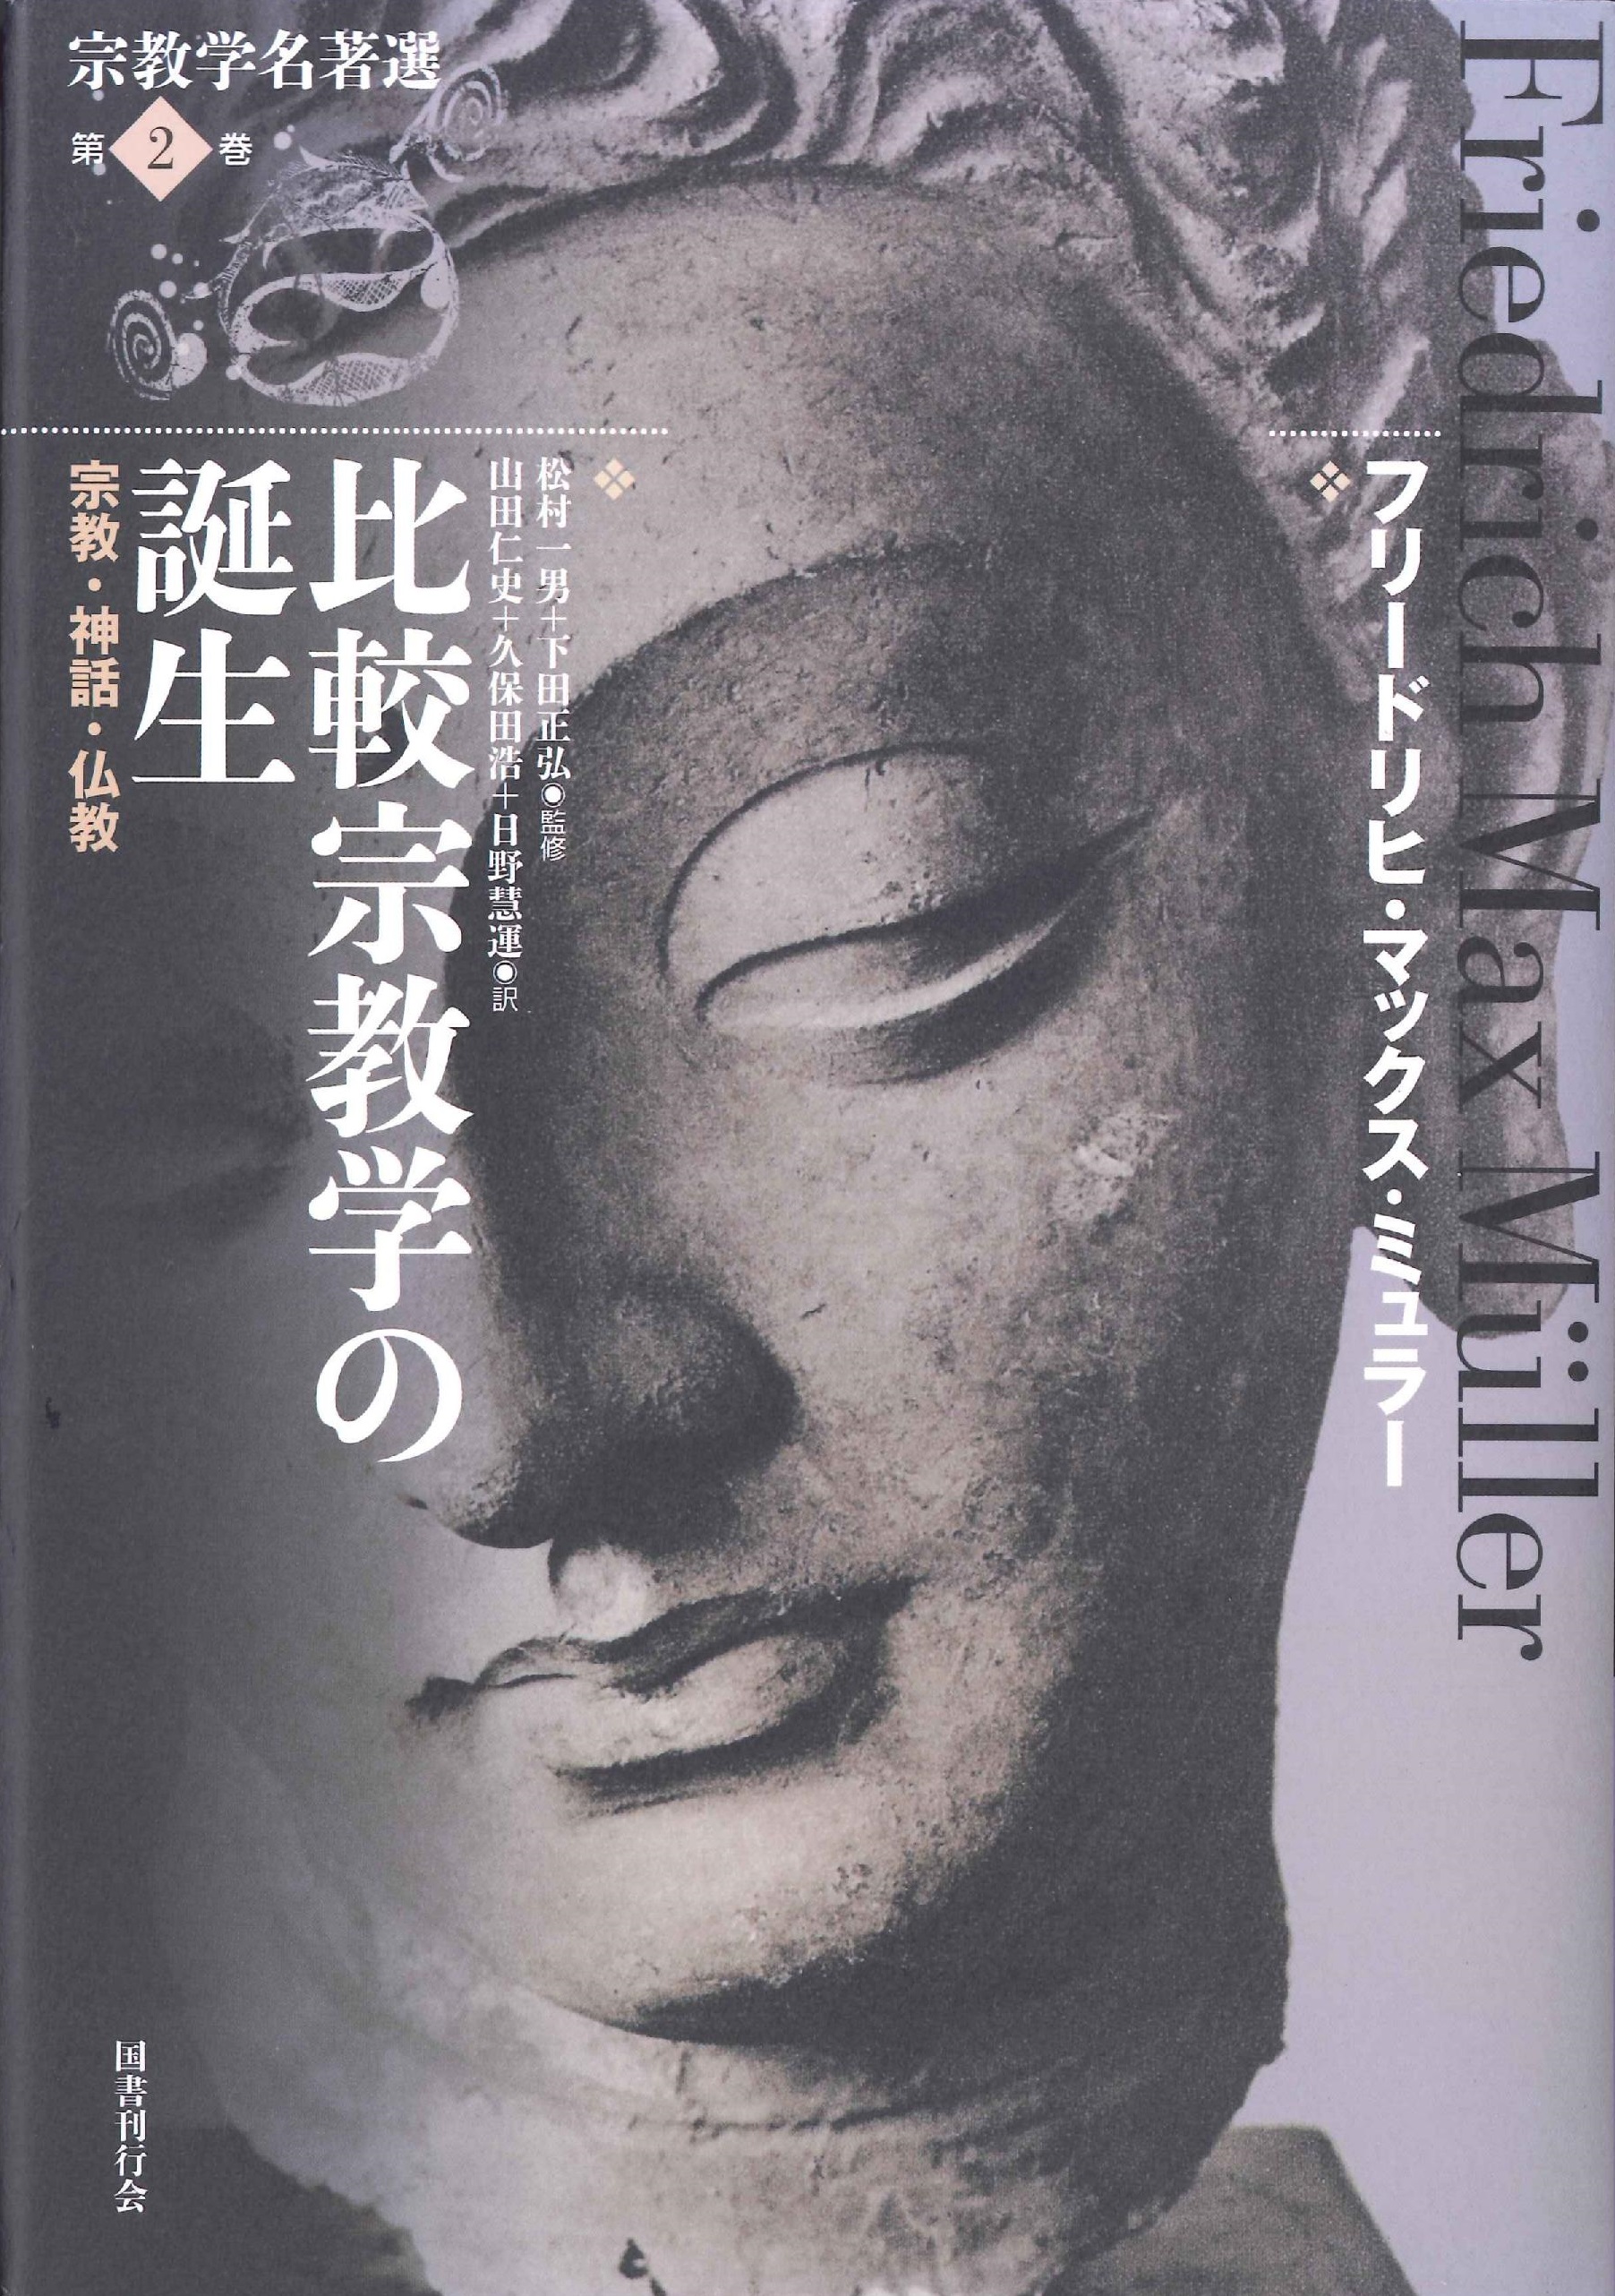 Book cover: photograph of the face of a Buddhist statue